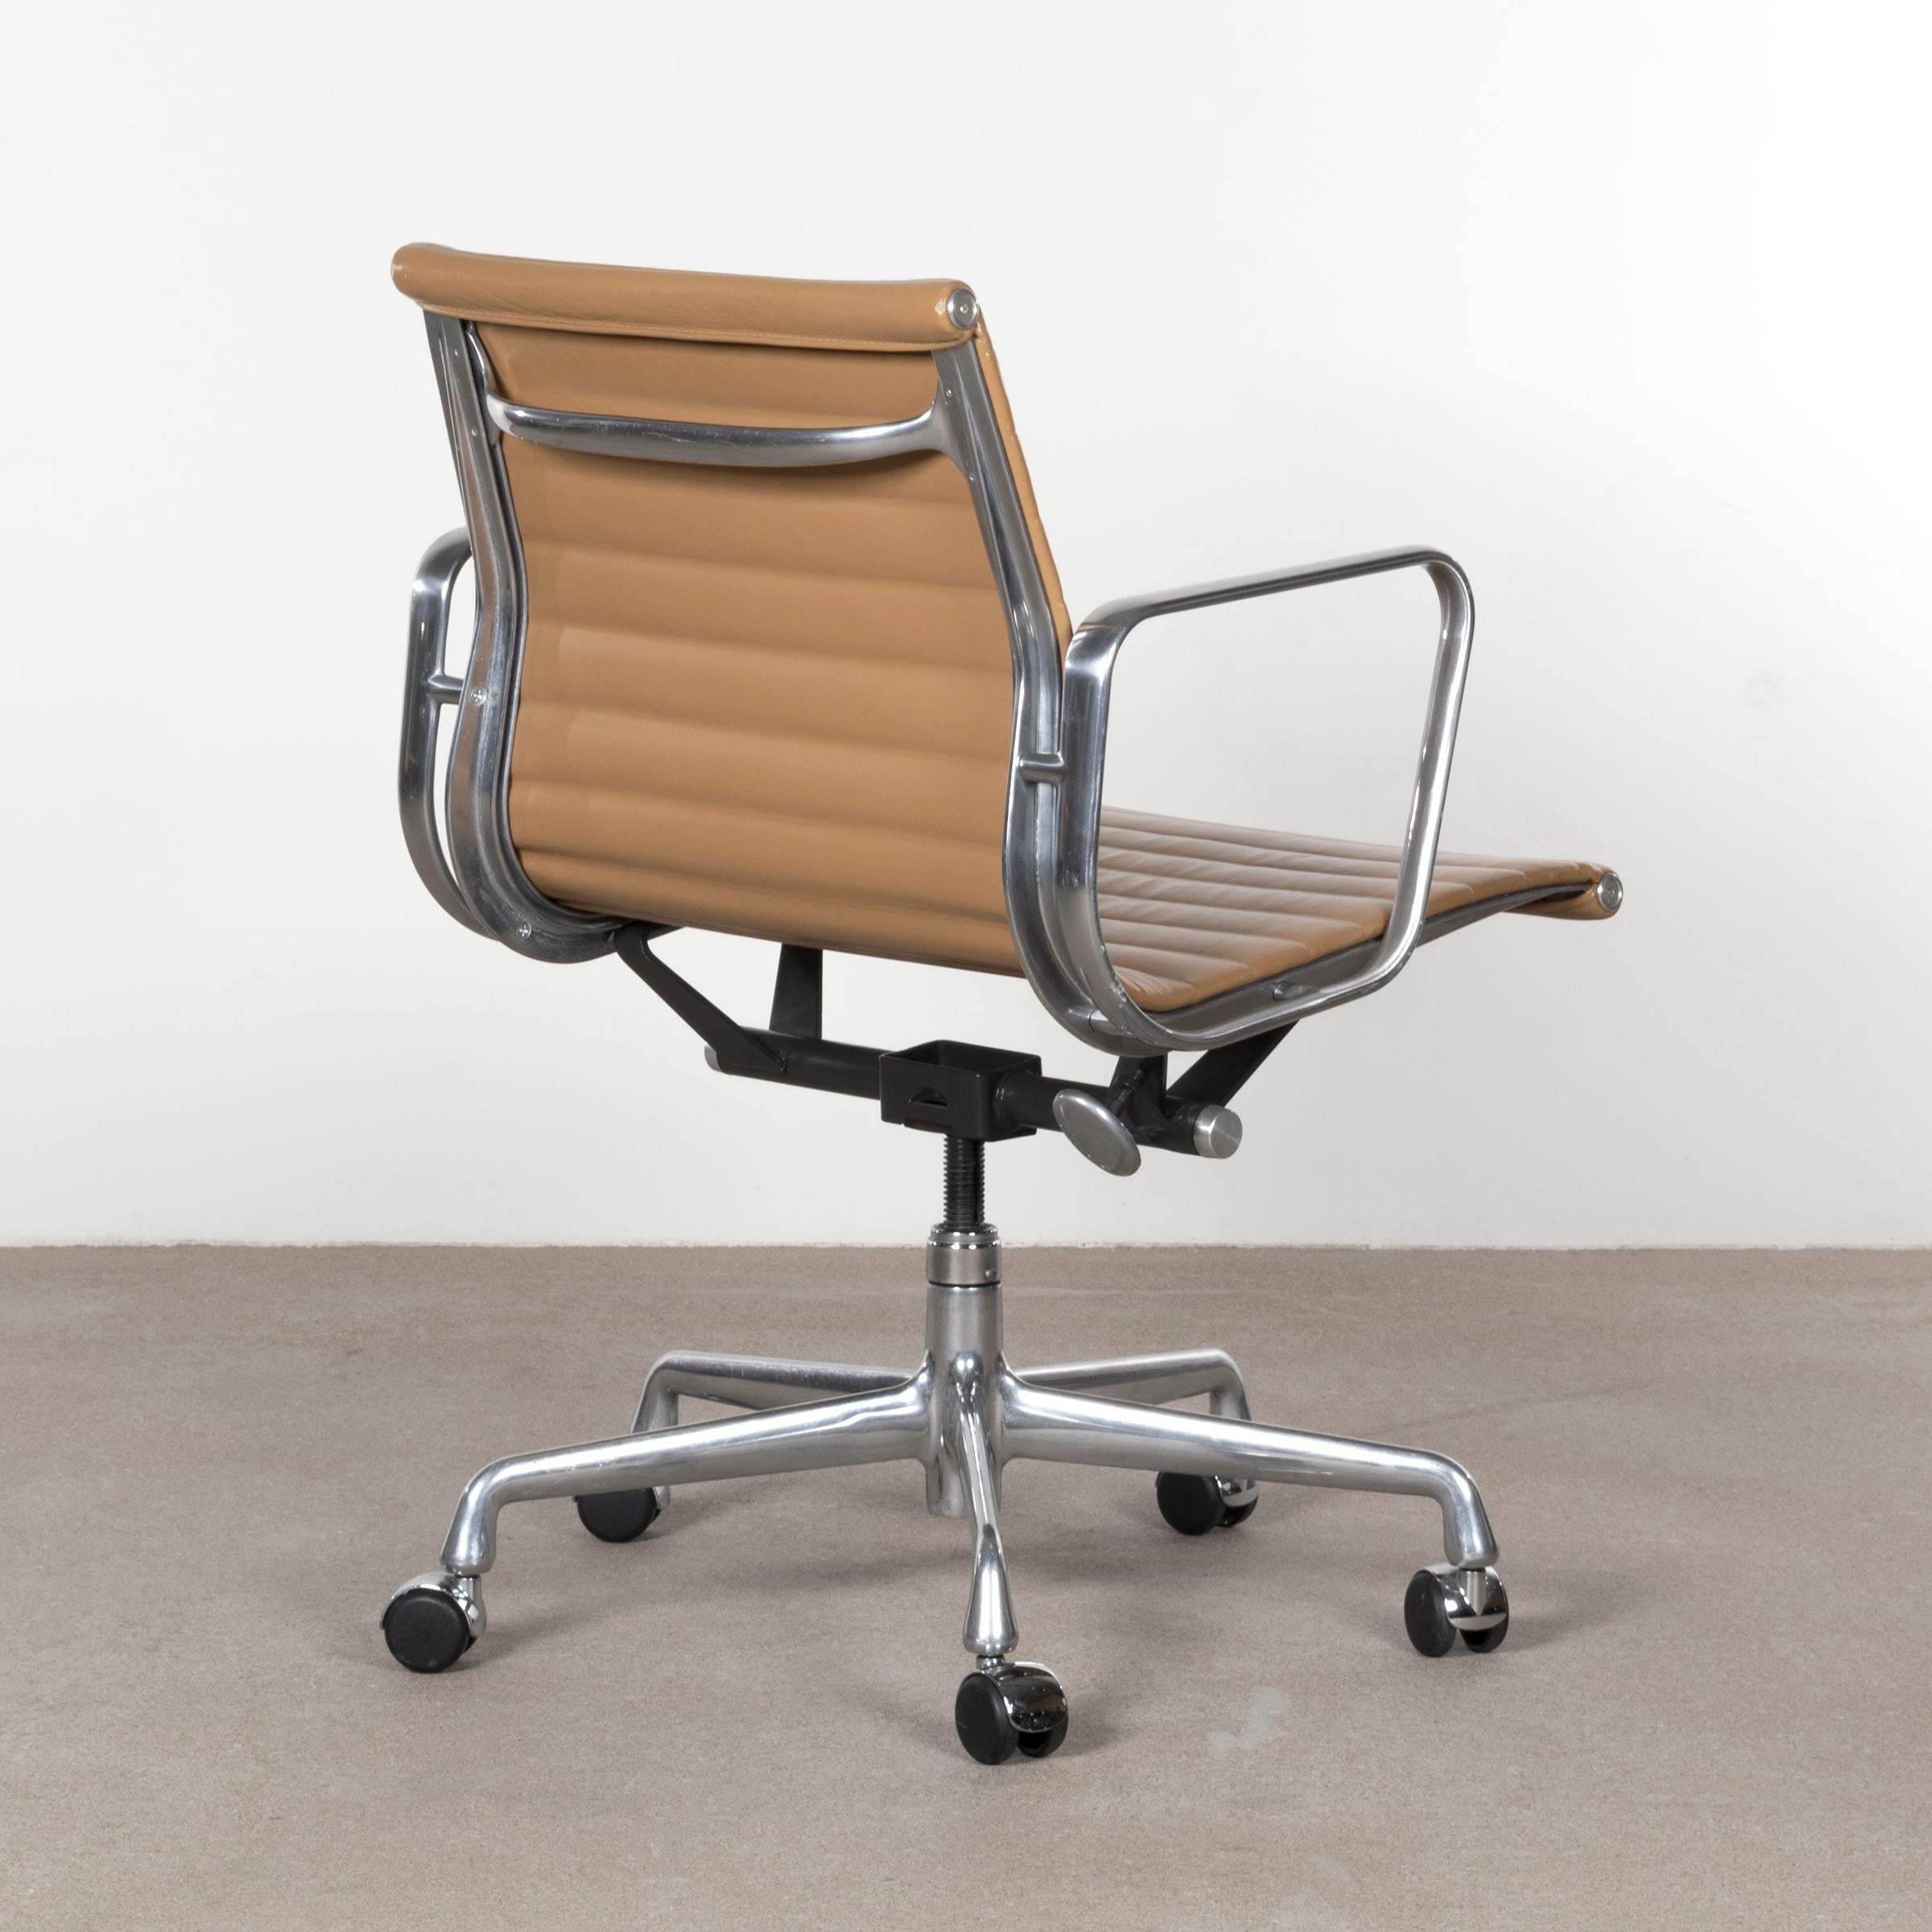 Contemporary Multiple Eames Management Office Chair in Cognac Leather for Herman Miller